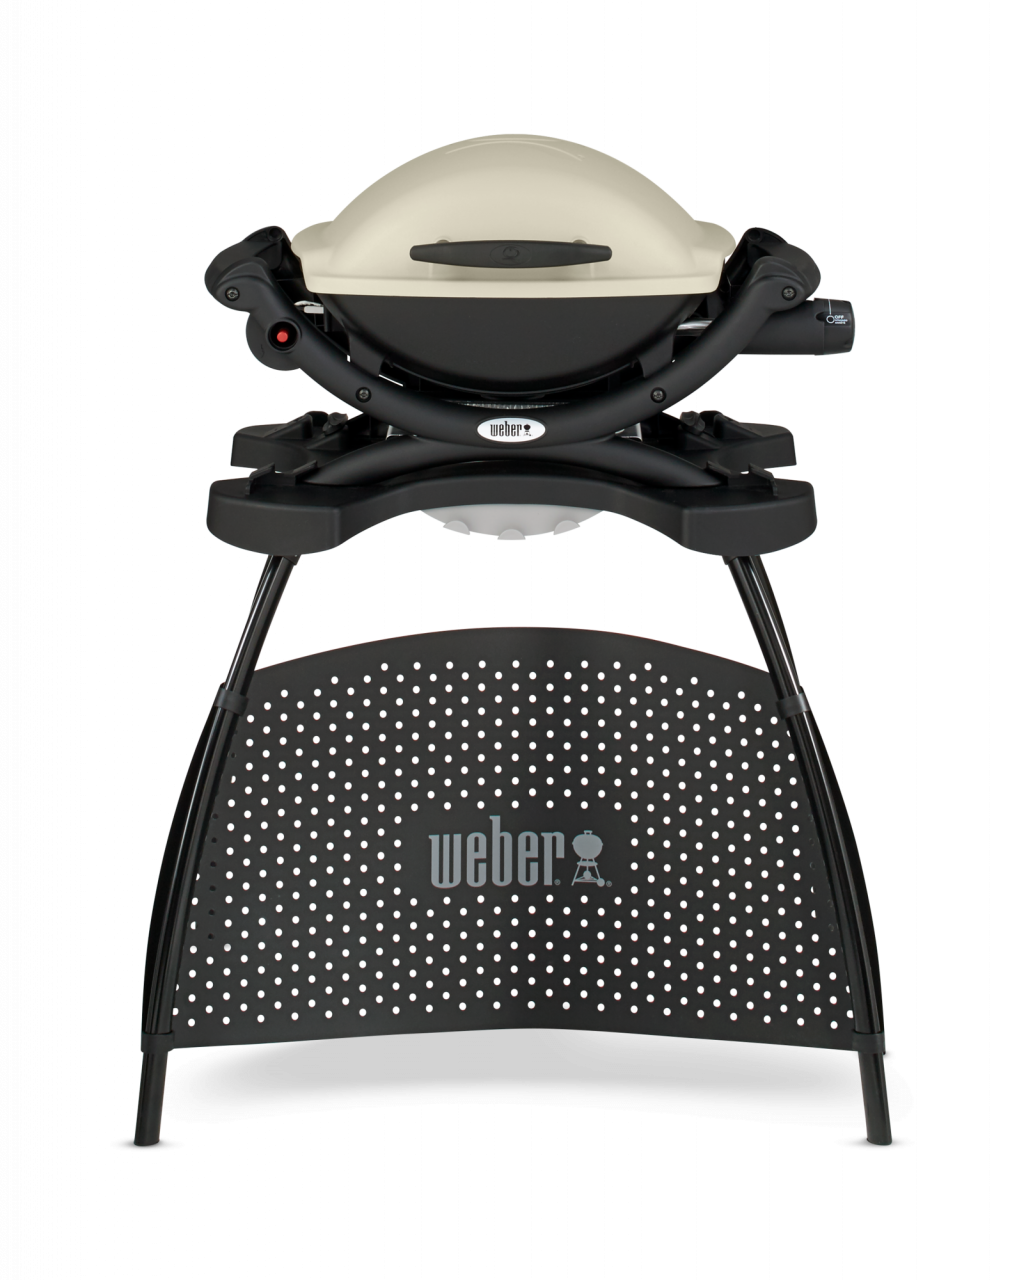 Weber Q 1000 met Stand Gasbarbecue